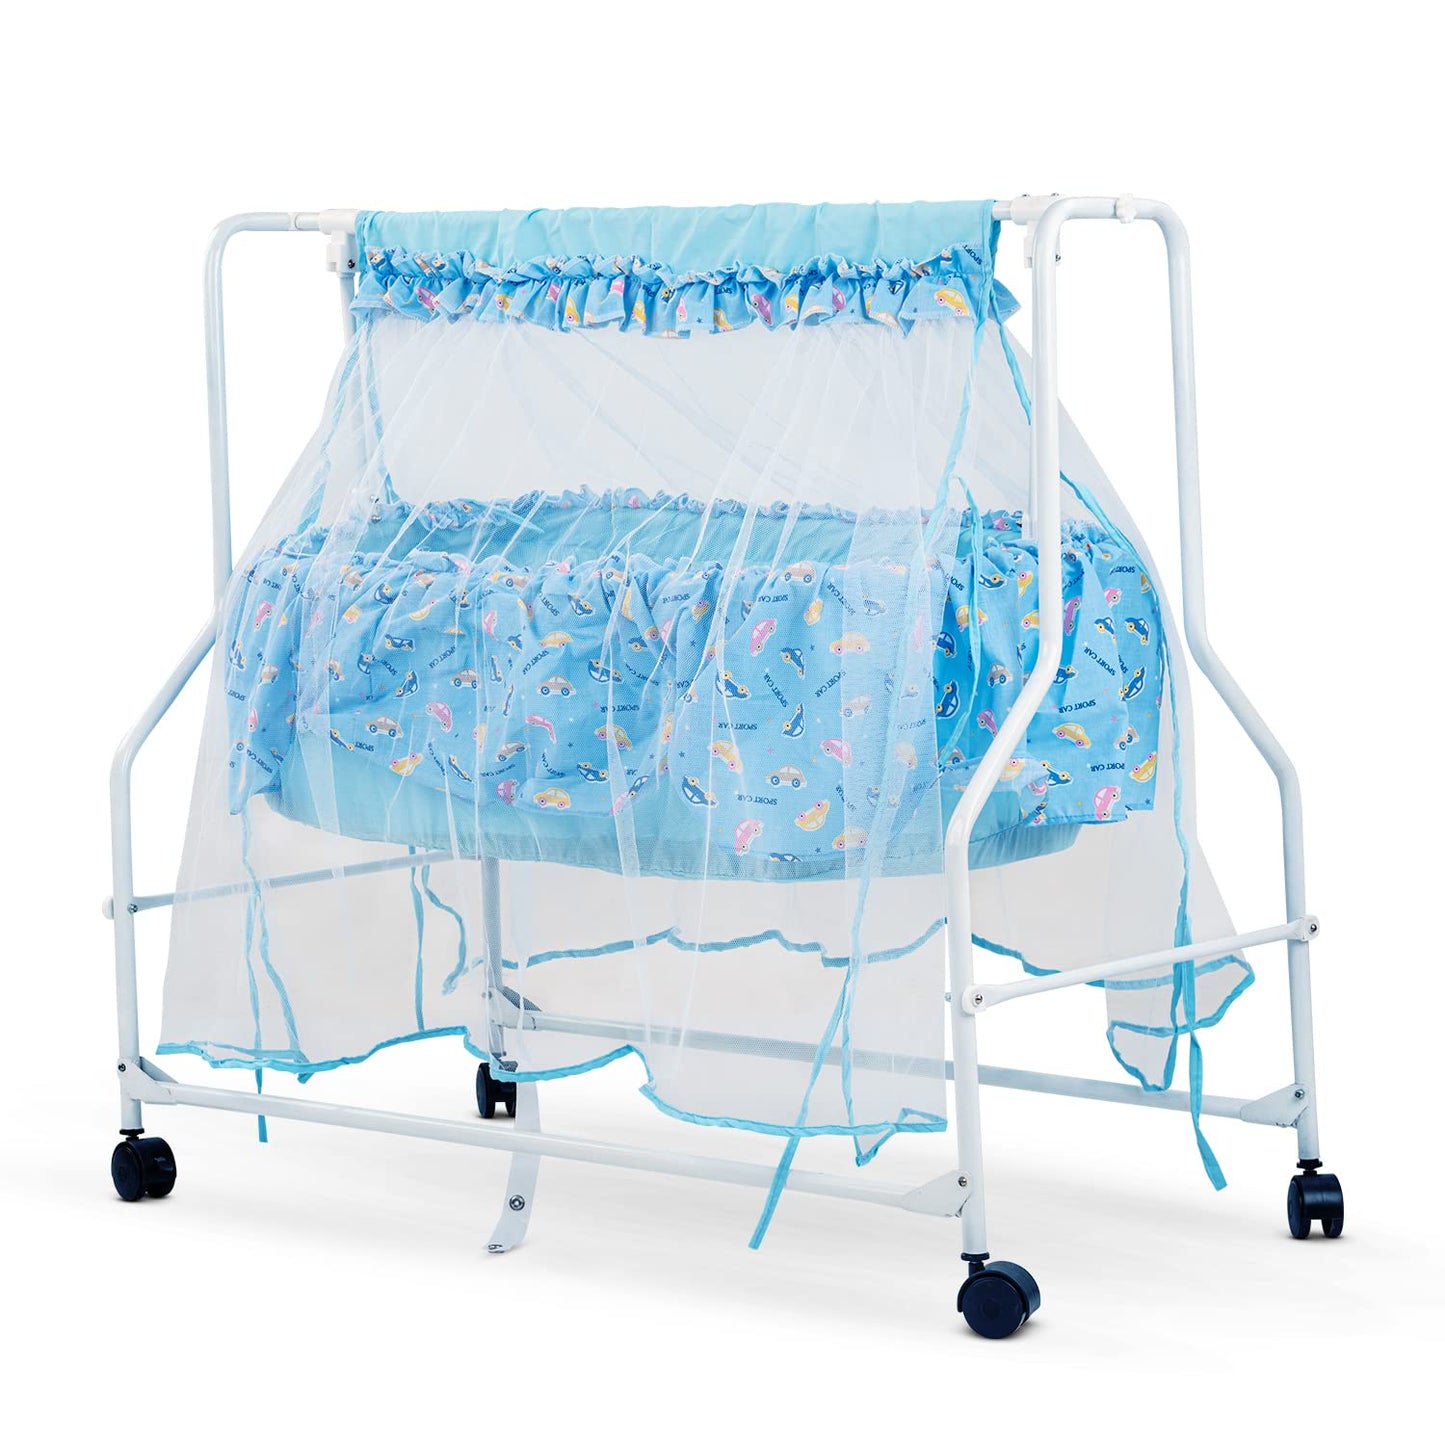 Baybee Baby Swing Cradle for Newborn Babies 0 to 12 Months (Blue)